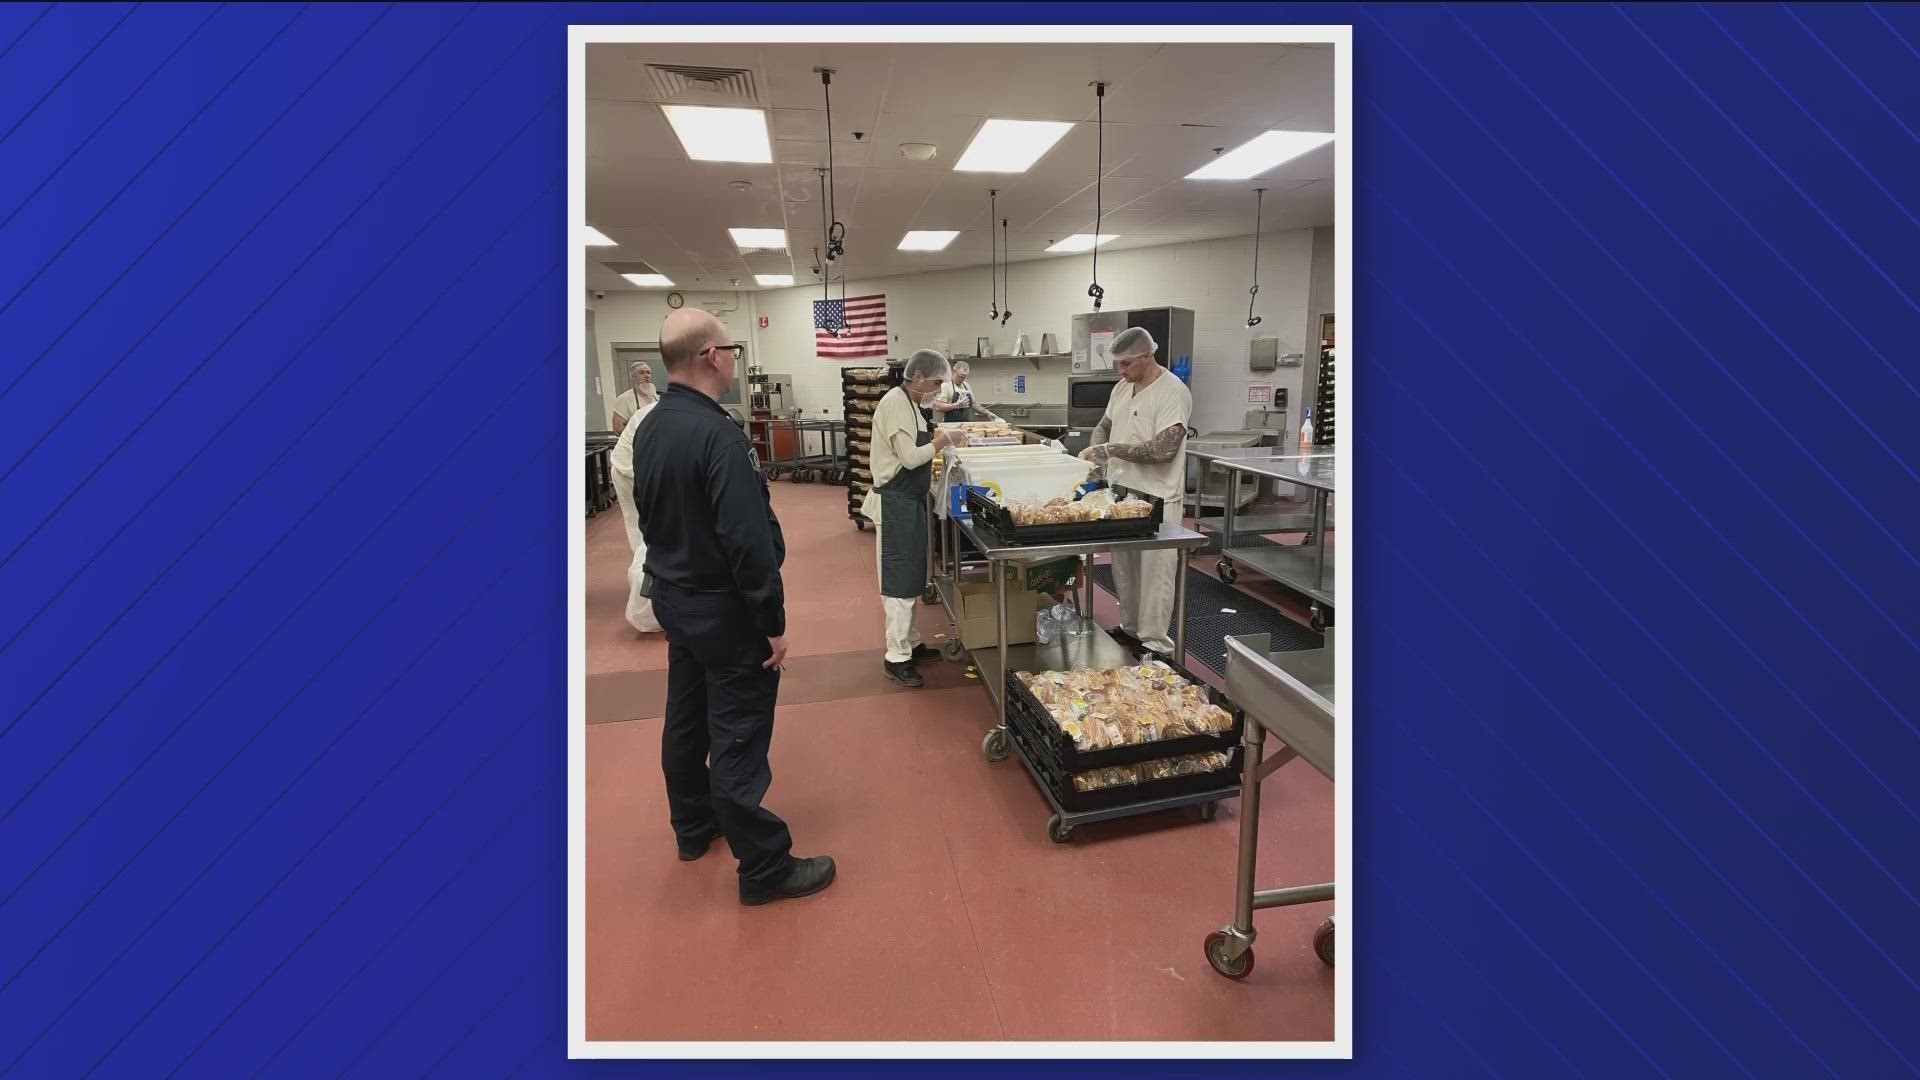 The Ada County Sheriff's Office announced in a Facebook post the county jail's plan to consolidate meal programs due to the high volume and turnover of inmates.